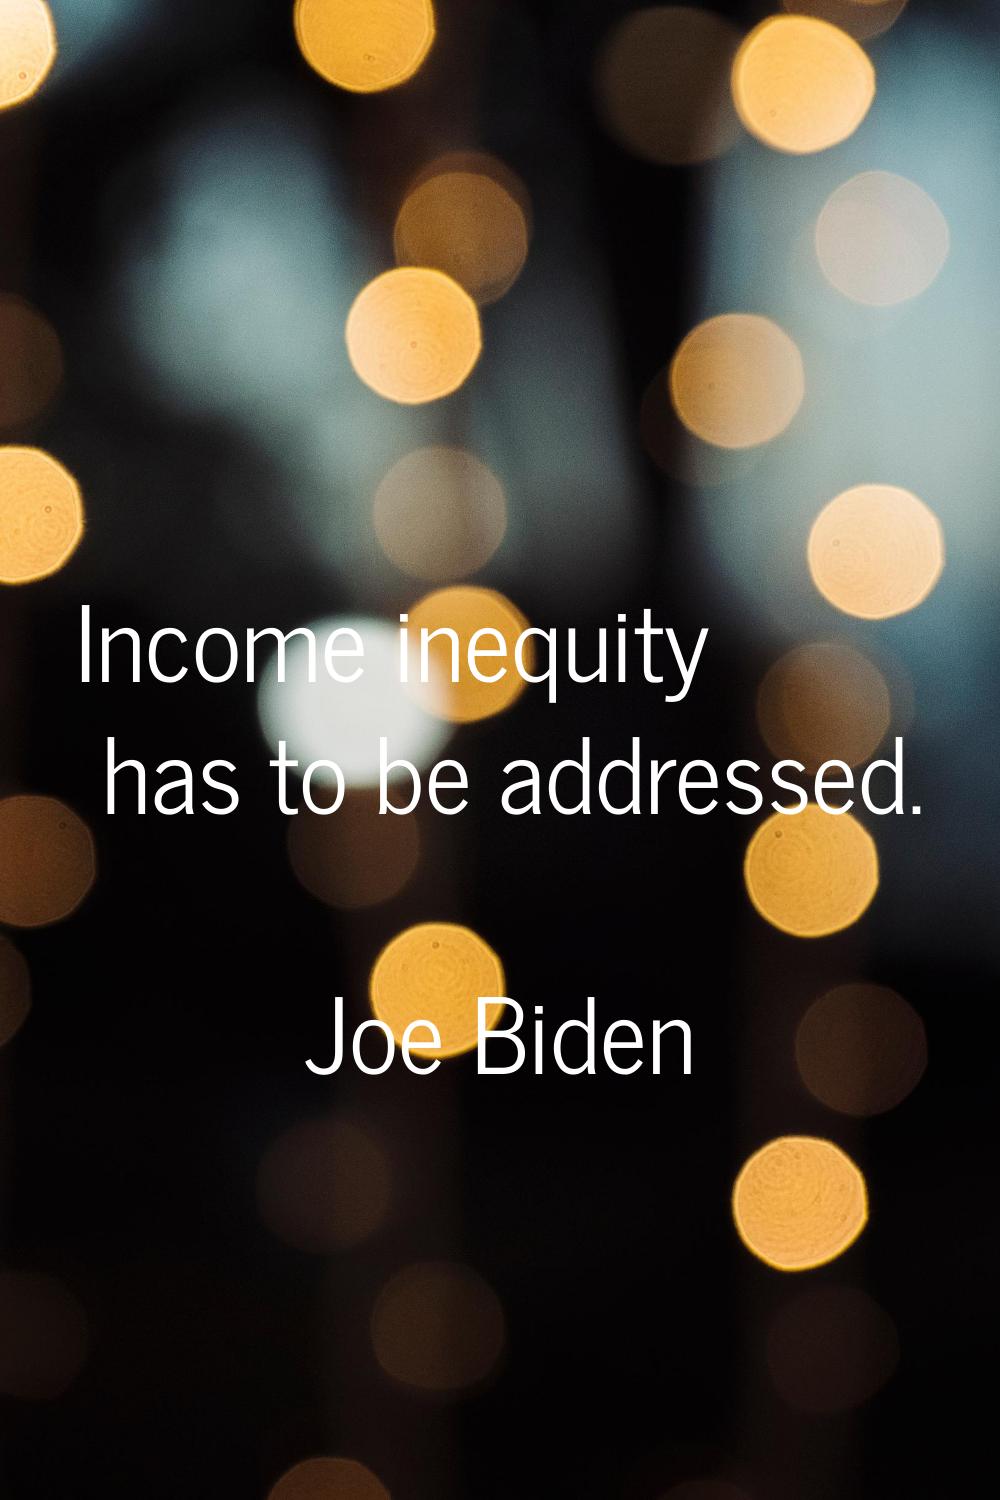 Income inequity has to be addressed.